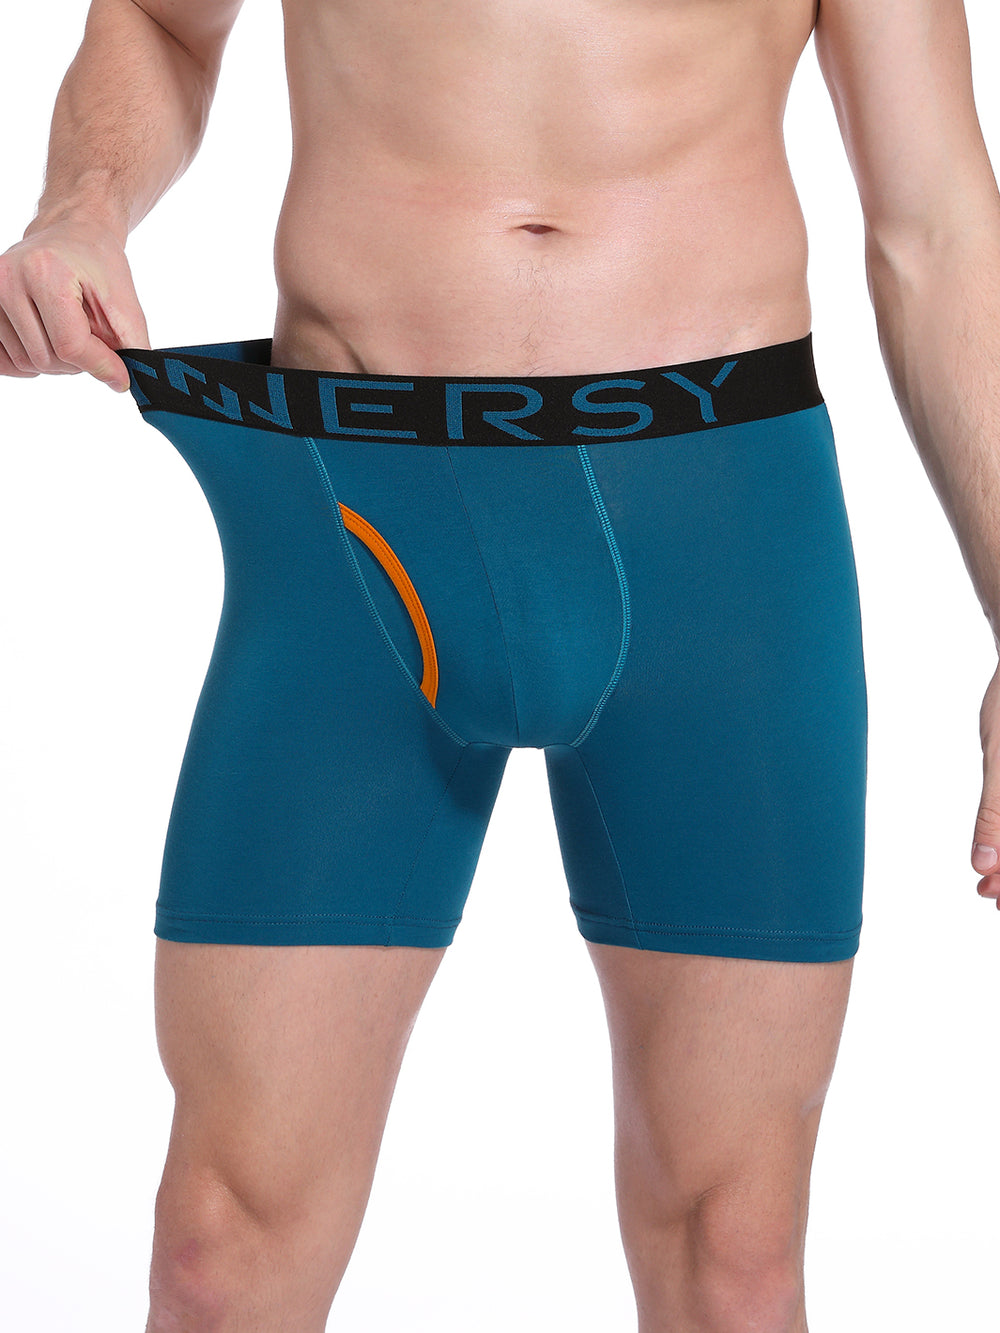 INNERSY Men's Mesh Boxer Briefs Cooling Breathable Sports